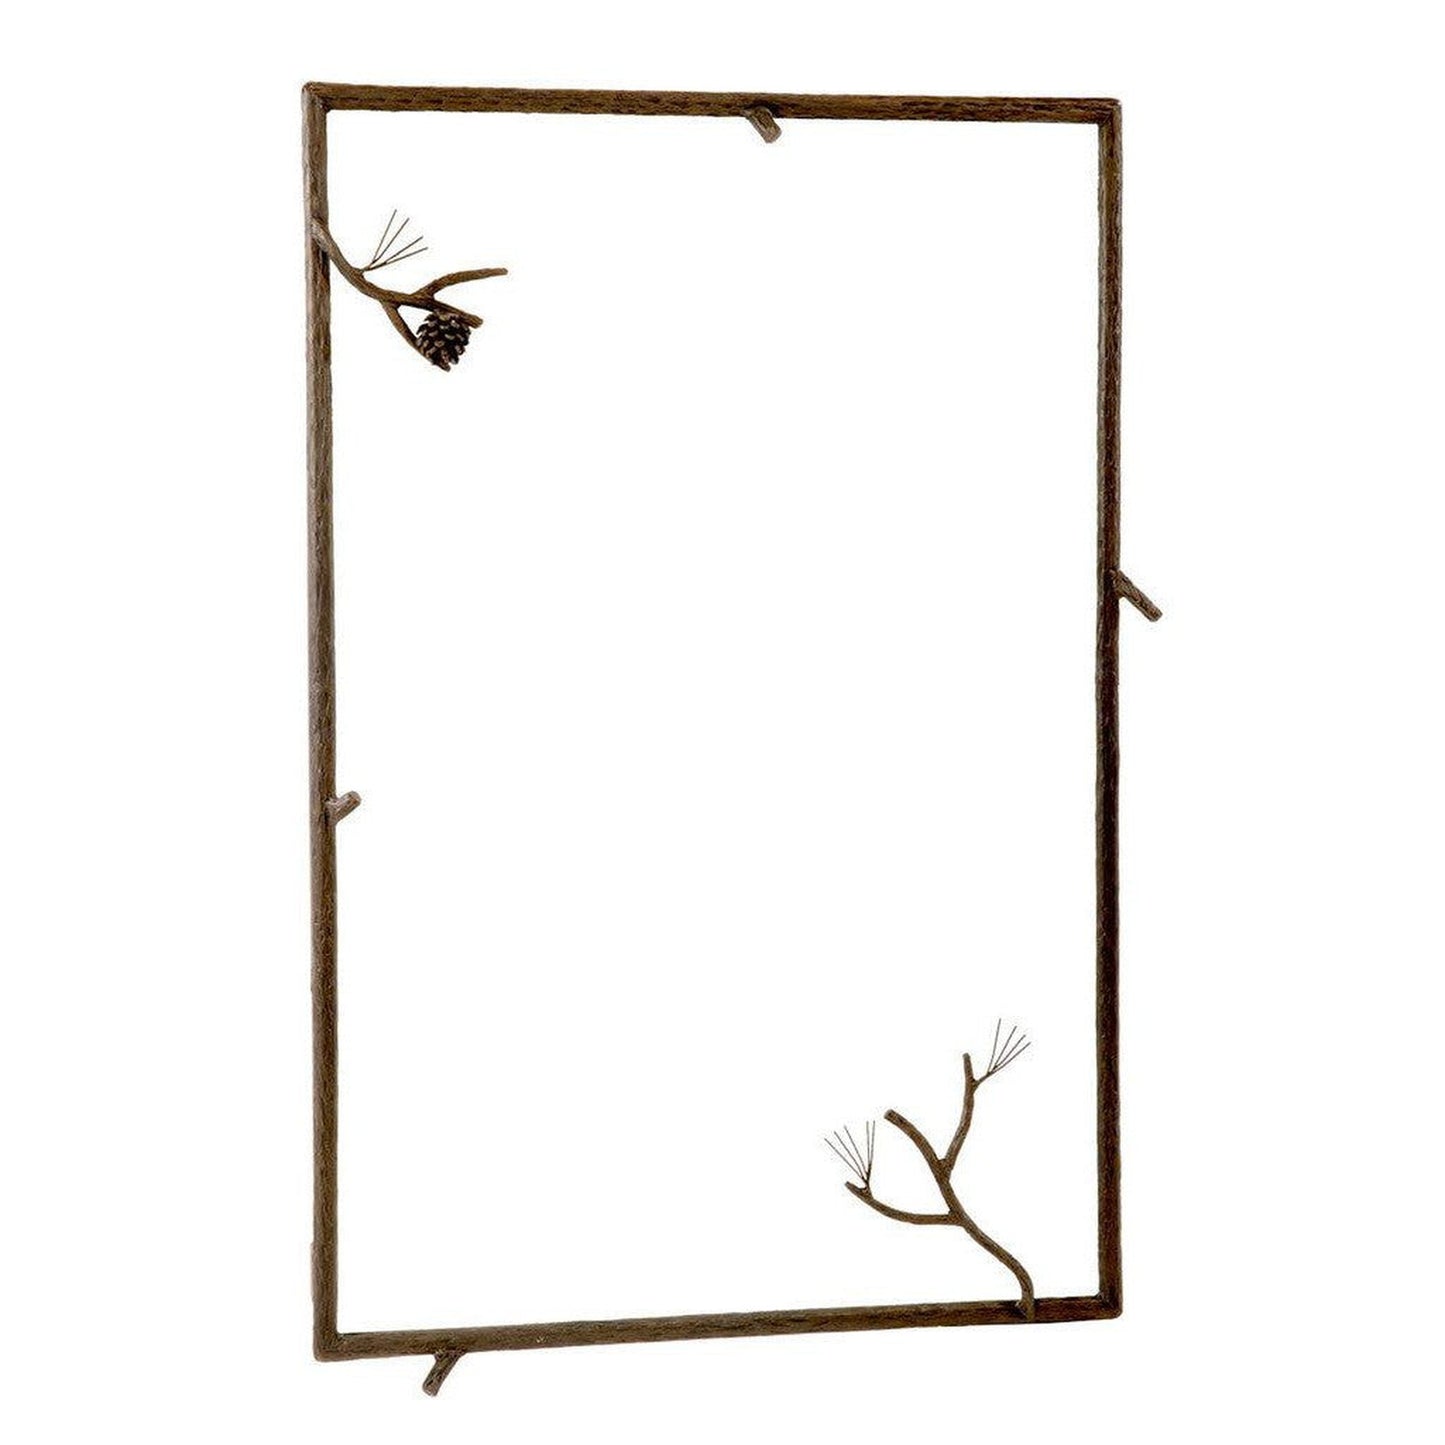 Stone County Ironworks Pine 25" x 21" Small Burnished Gold Iron Wall Mirror